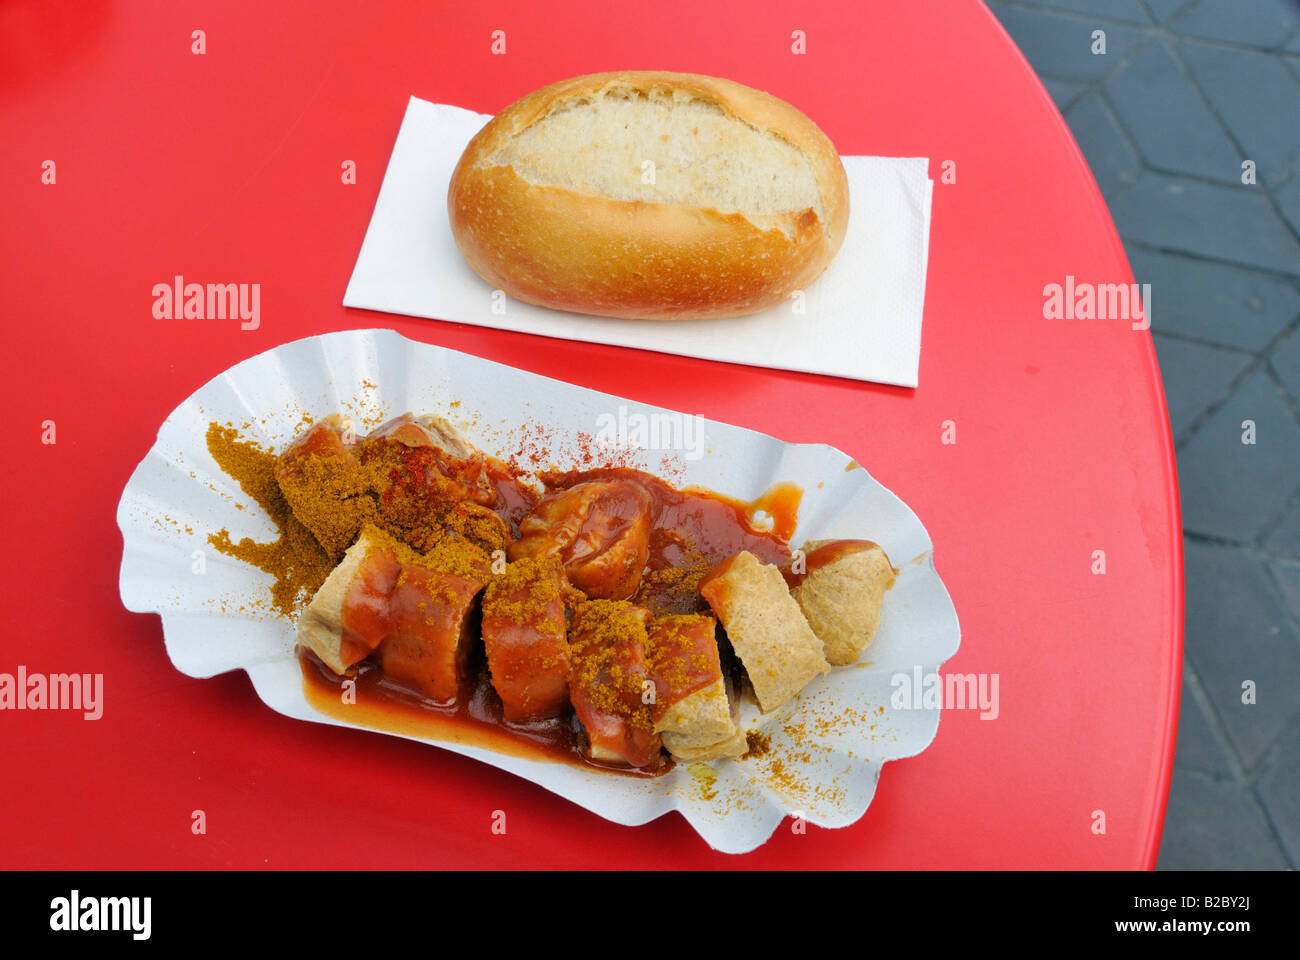 Currywurst, curried sausage and bun on a red table Stock Photo